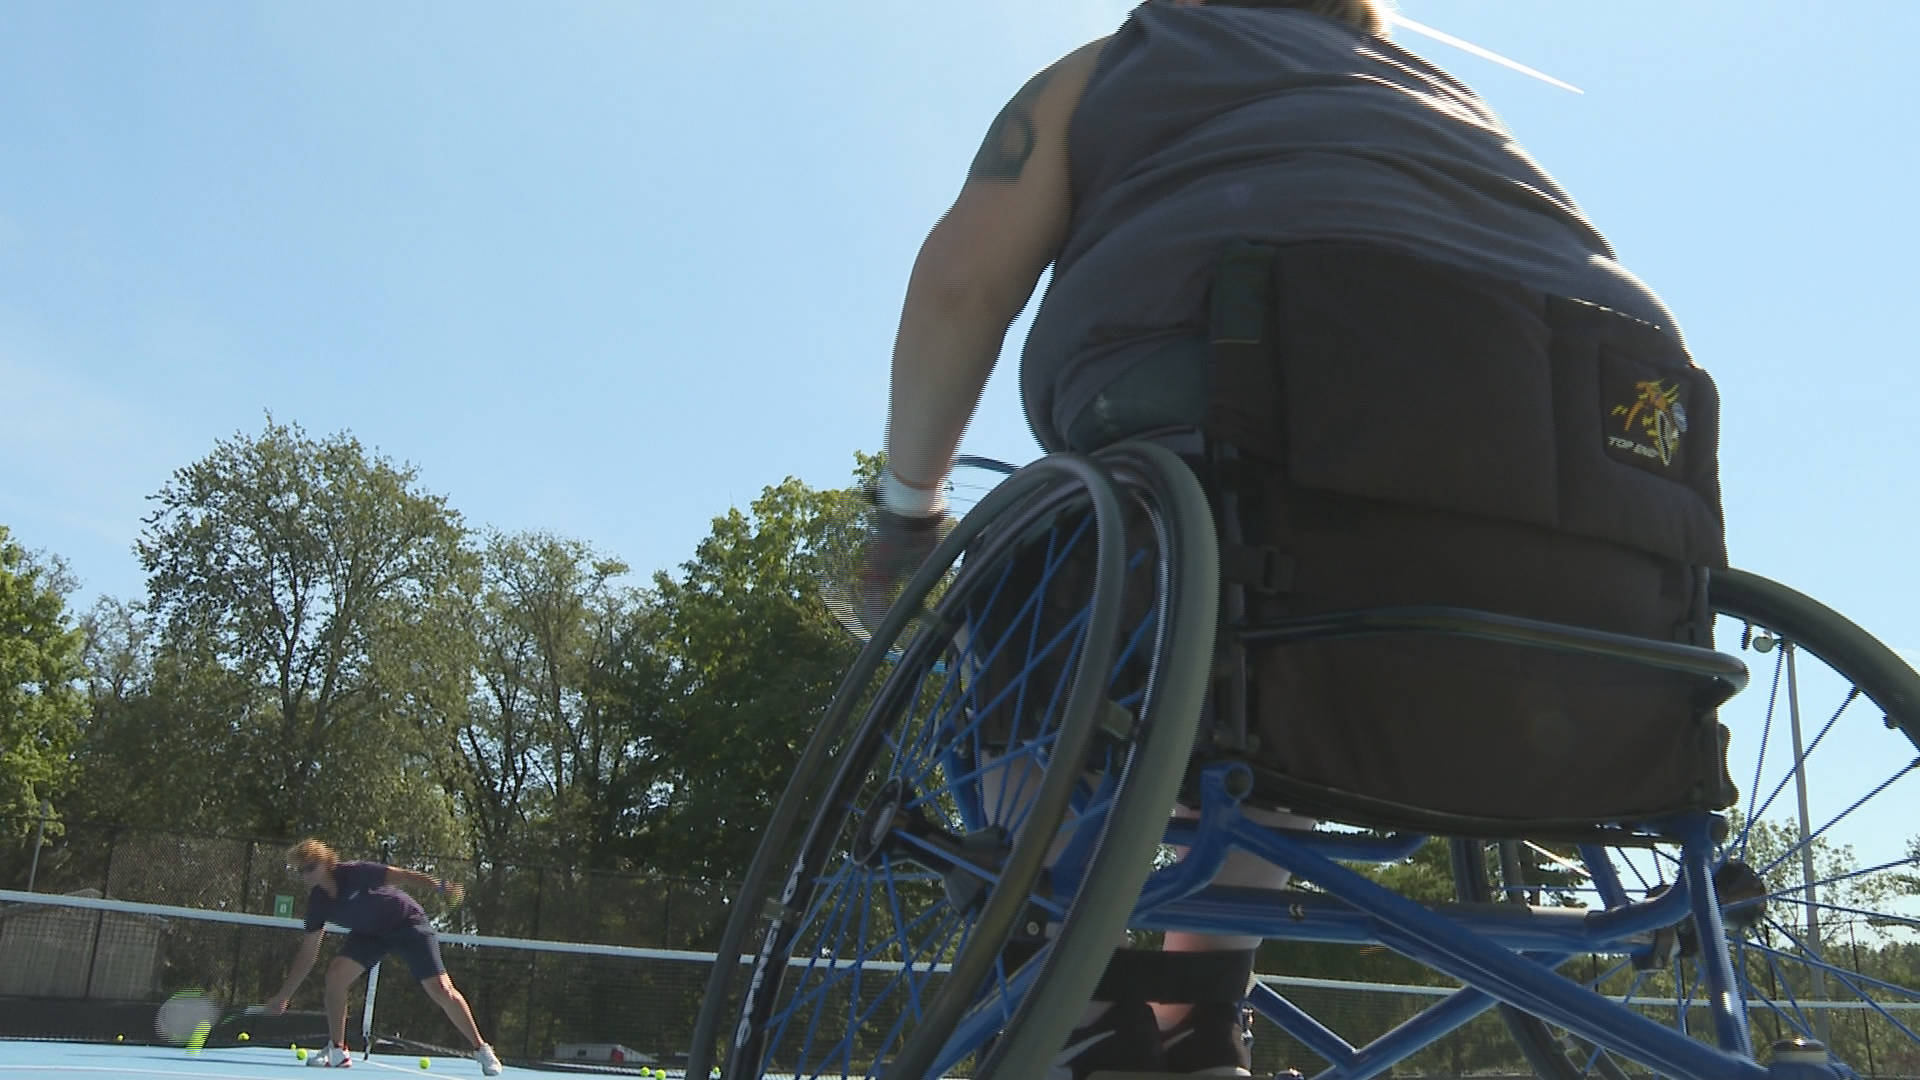 Denise Fitzgerald wanted to find something to feed her athletic nature. She found wheelchair tennis.